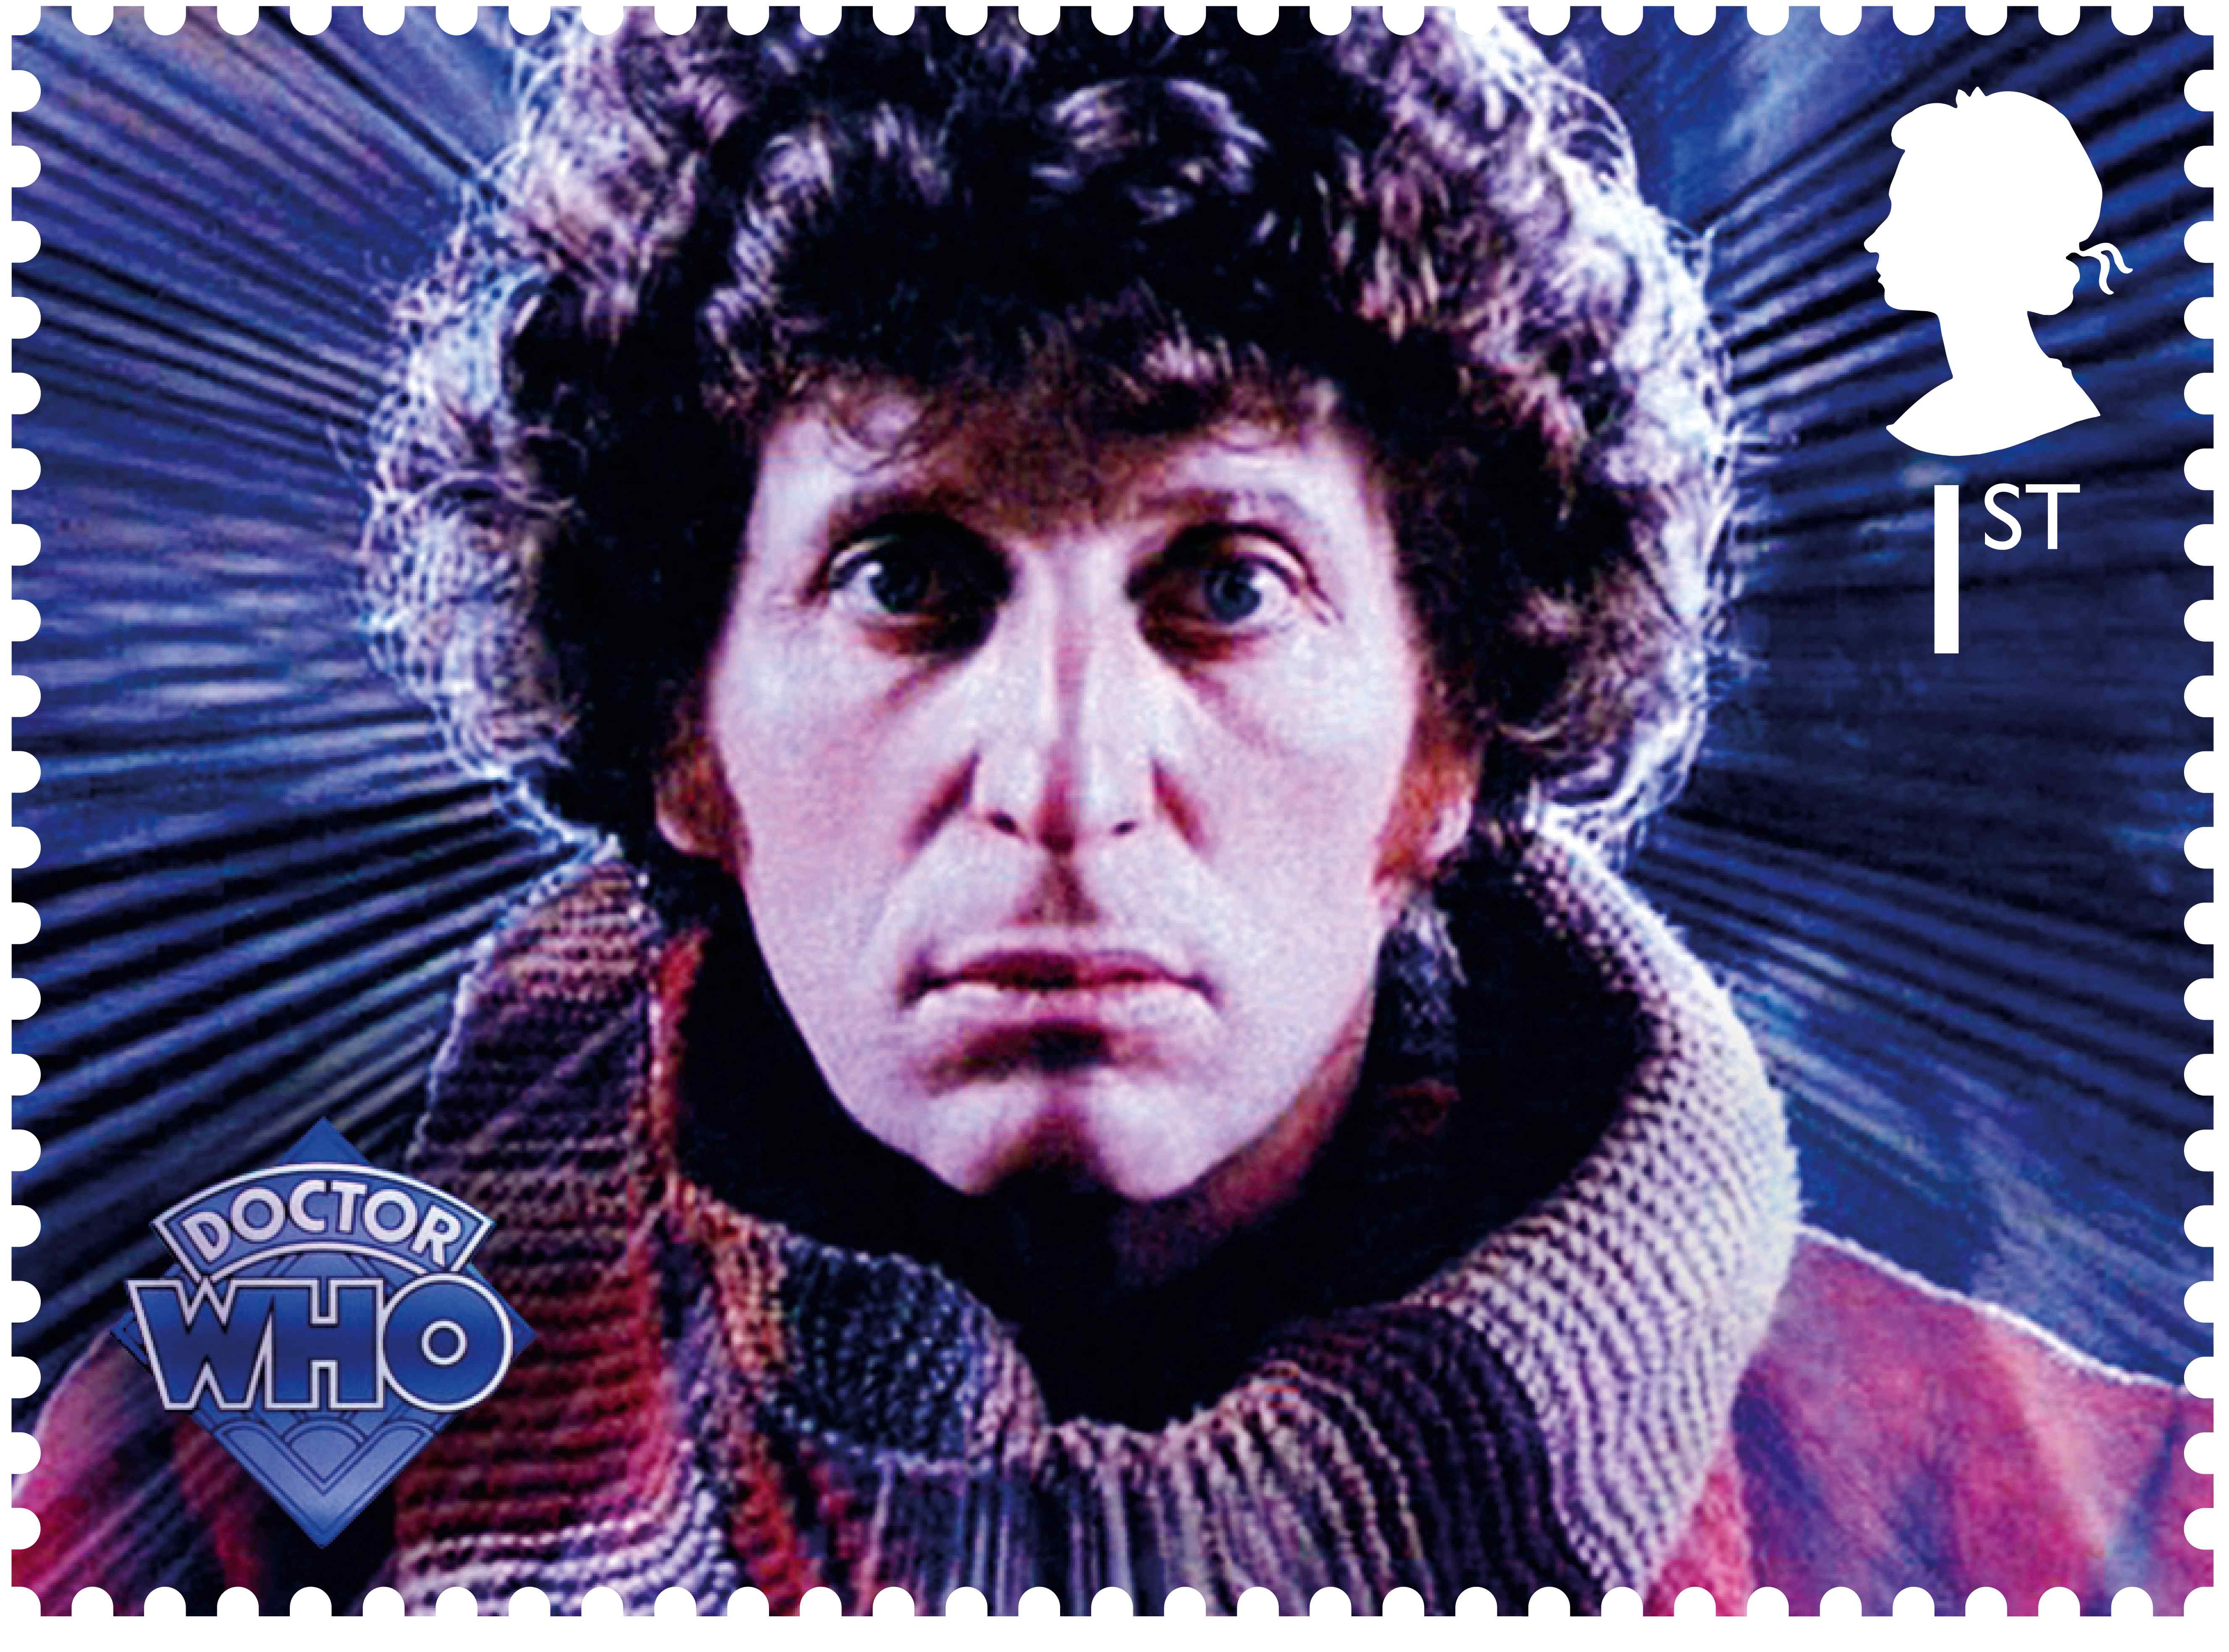 dr who tom baker 1st stamp - About Time - new Royal Mail stamps mark Dr Who's 50th anniversary